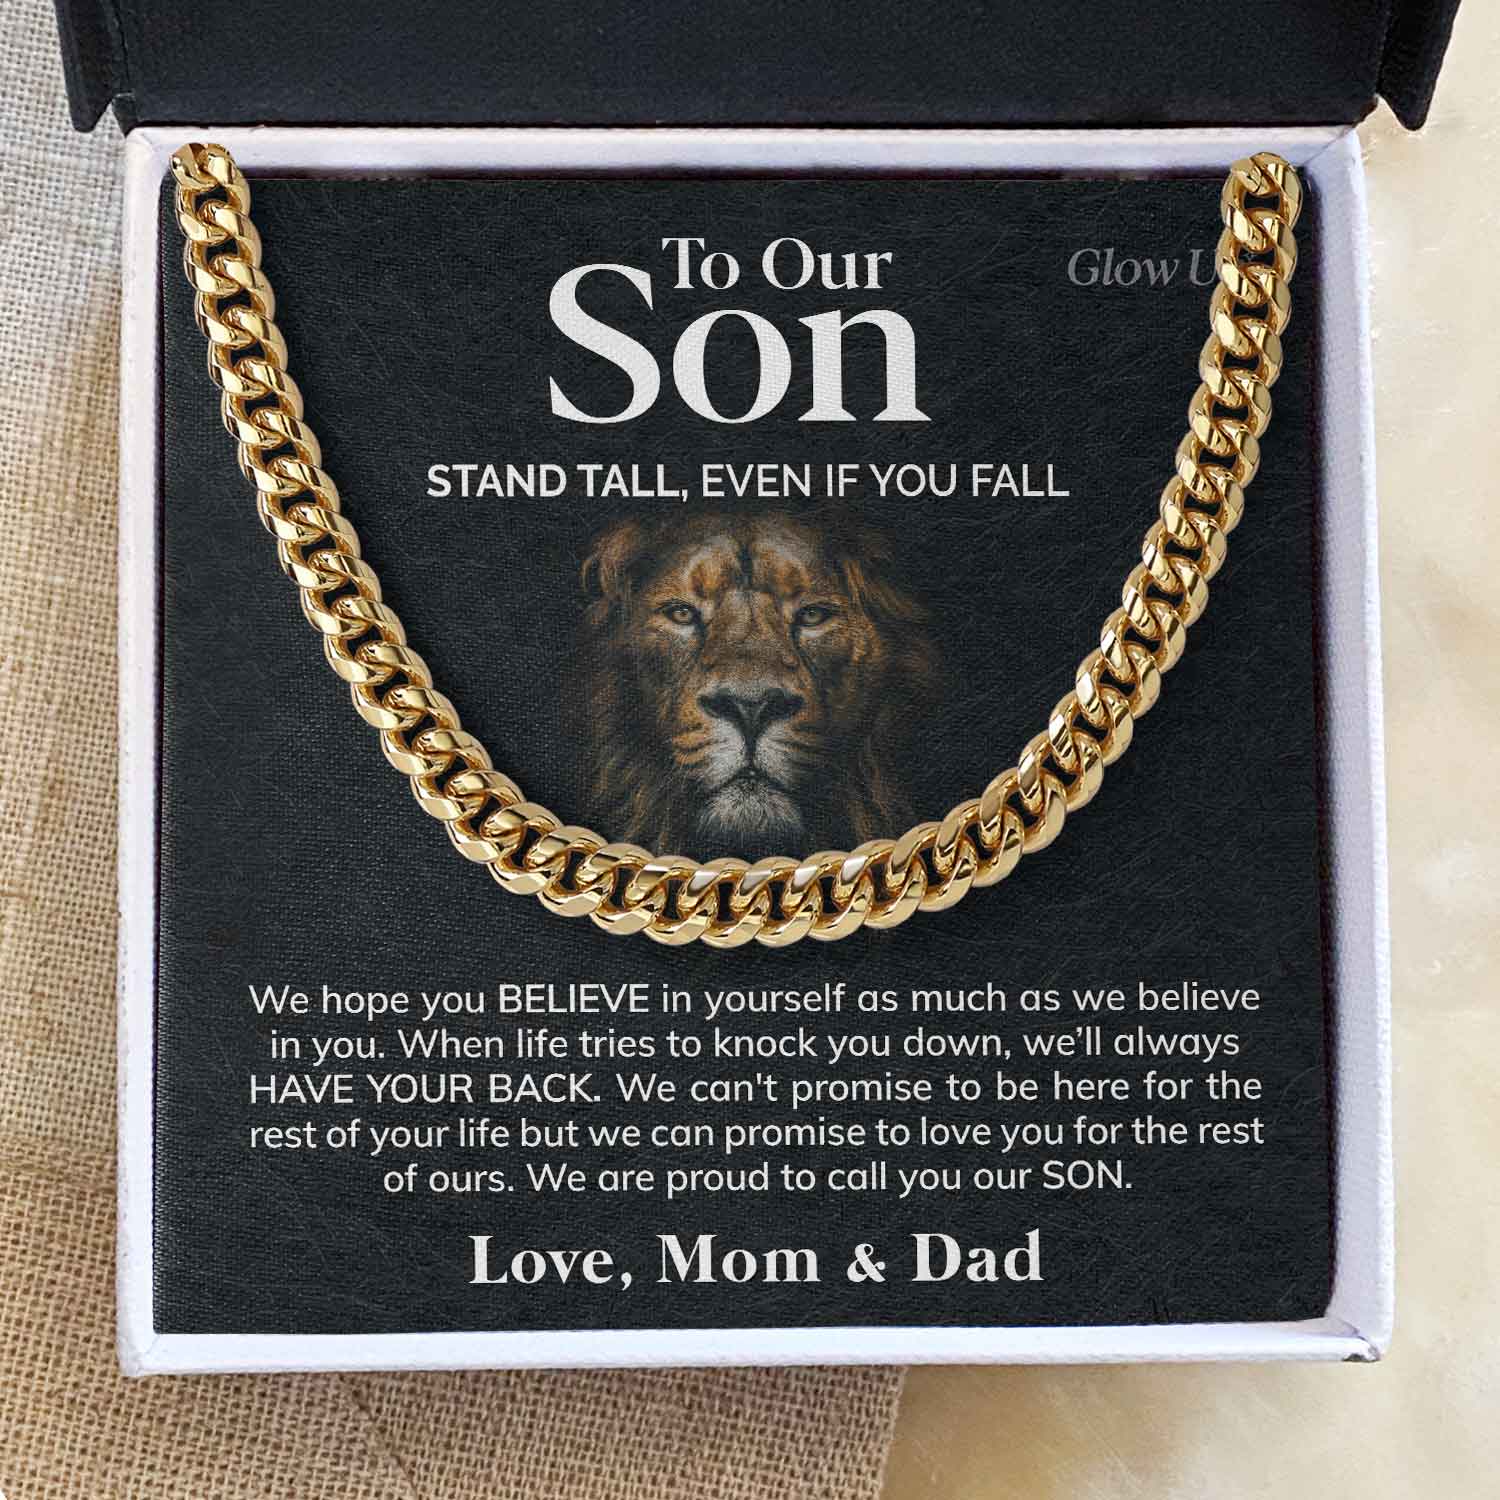 ShineOn Fulfillment Jewelry 14K Yellow Gold Finish / Two-Toned Box To Our Son - We believe in you - Cuban Link Chain